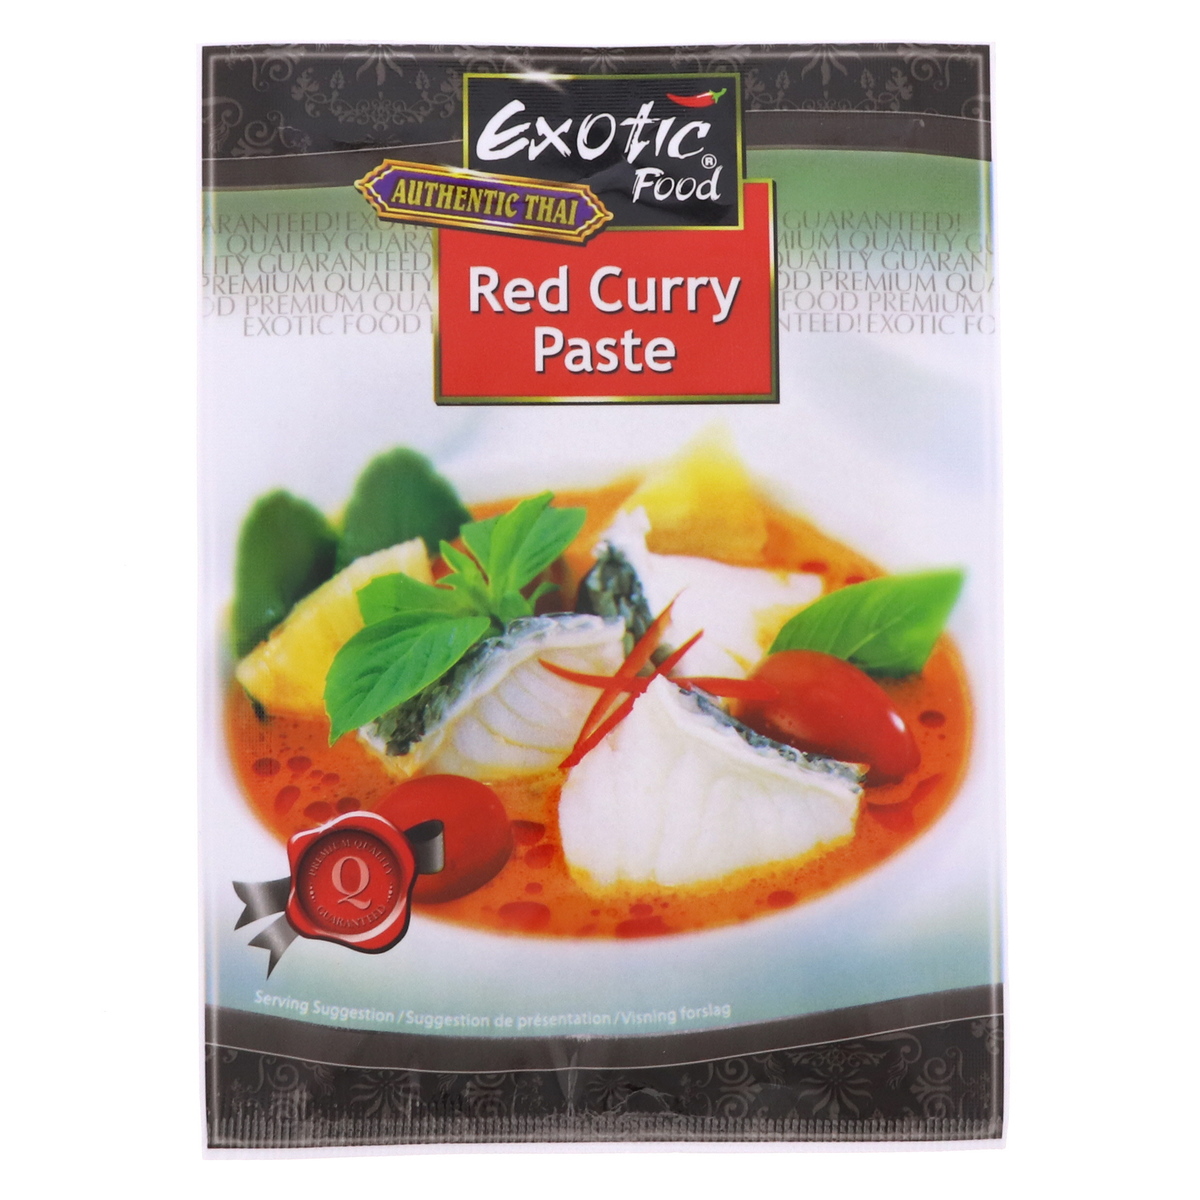 Exotic Food Authentic Thai Red Curry Paste 50g